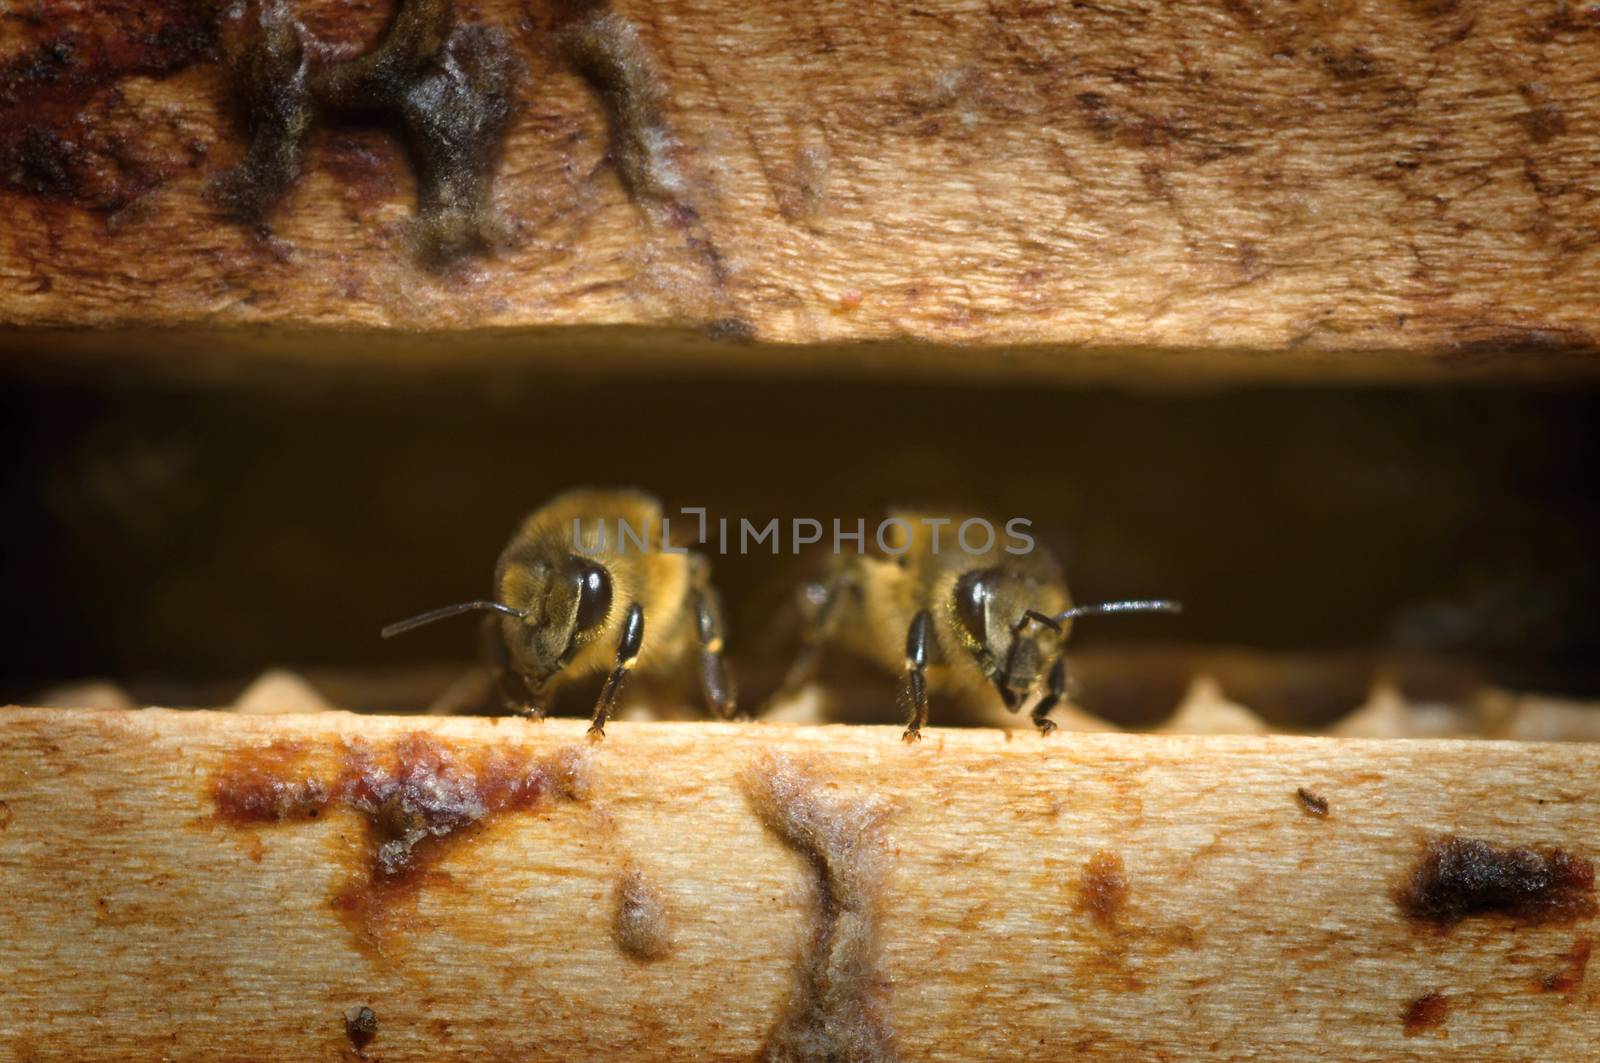 Two bees in a beehive - detail